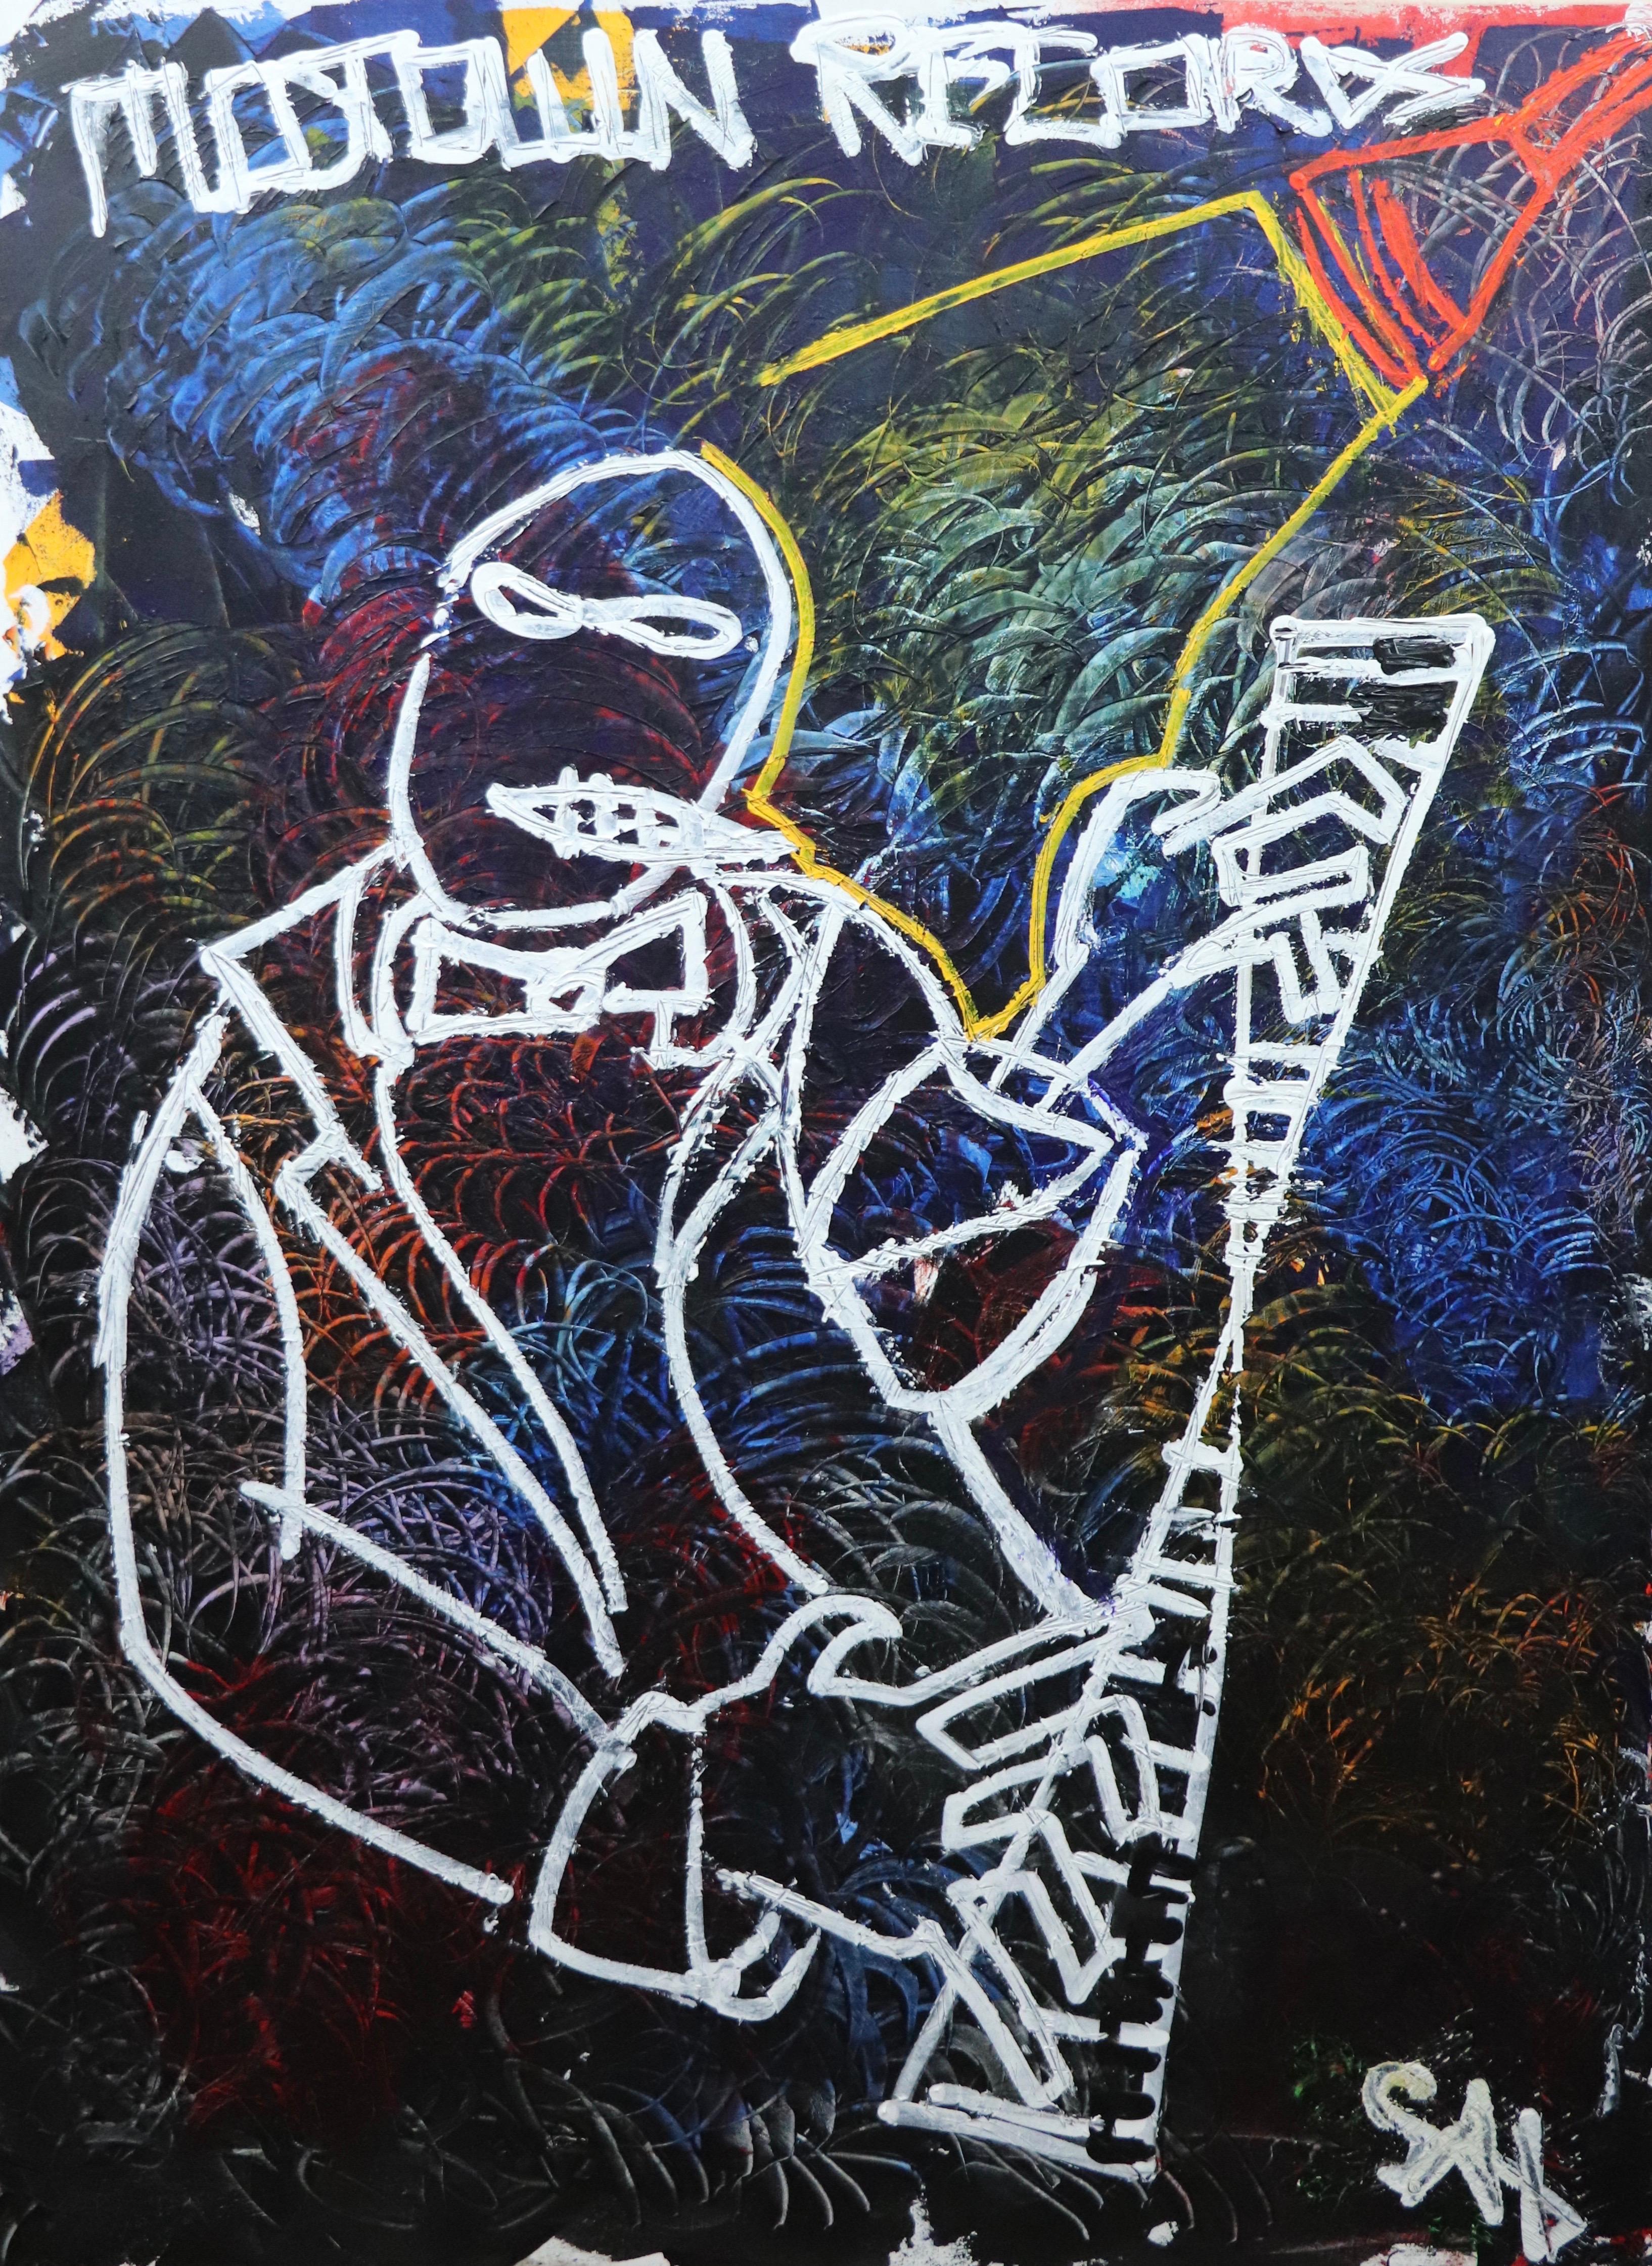 Sax Berlin Figurative Painting - "Motown Records". Contemporary Neo-Expressionist Painting